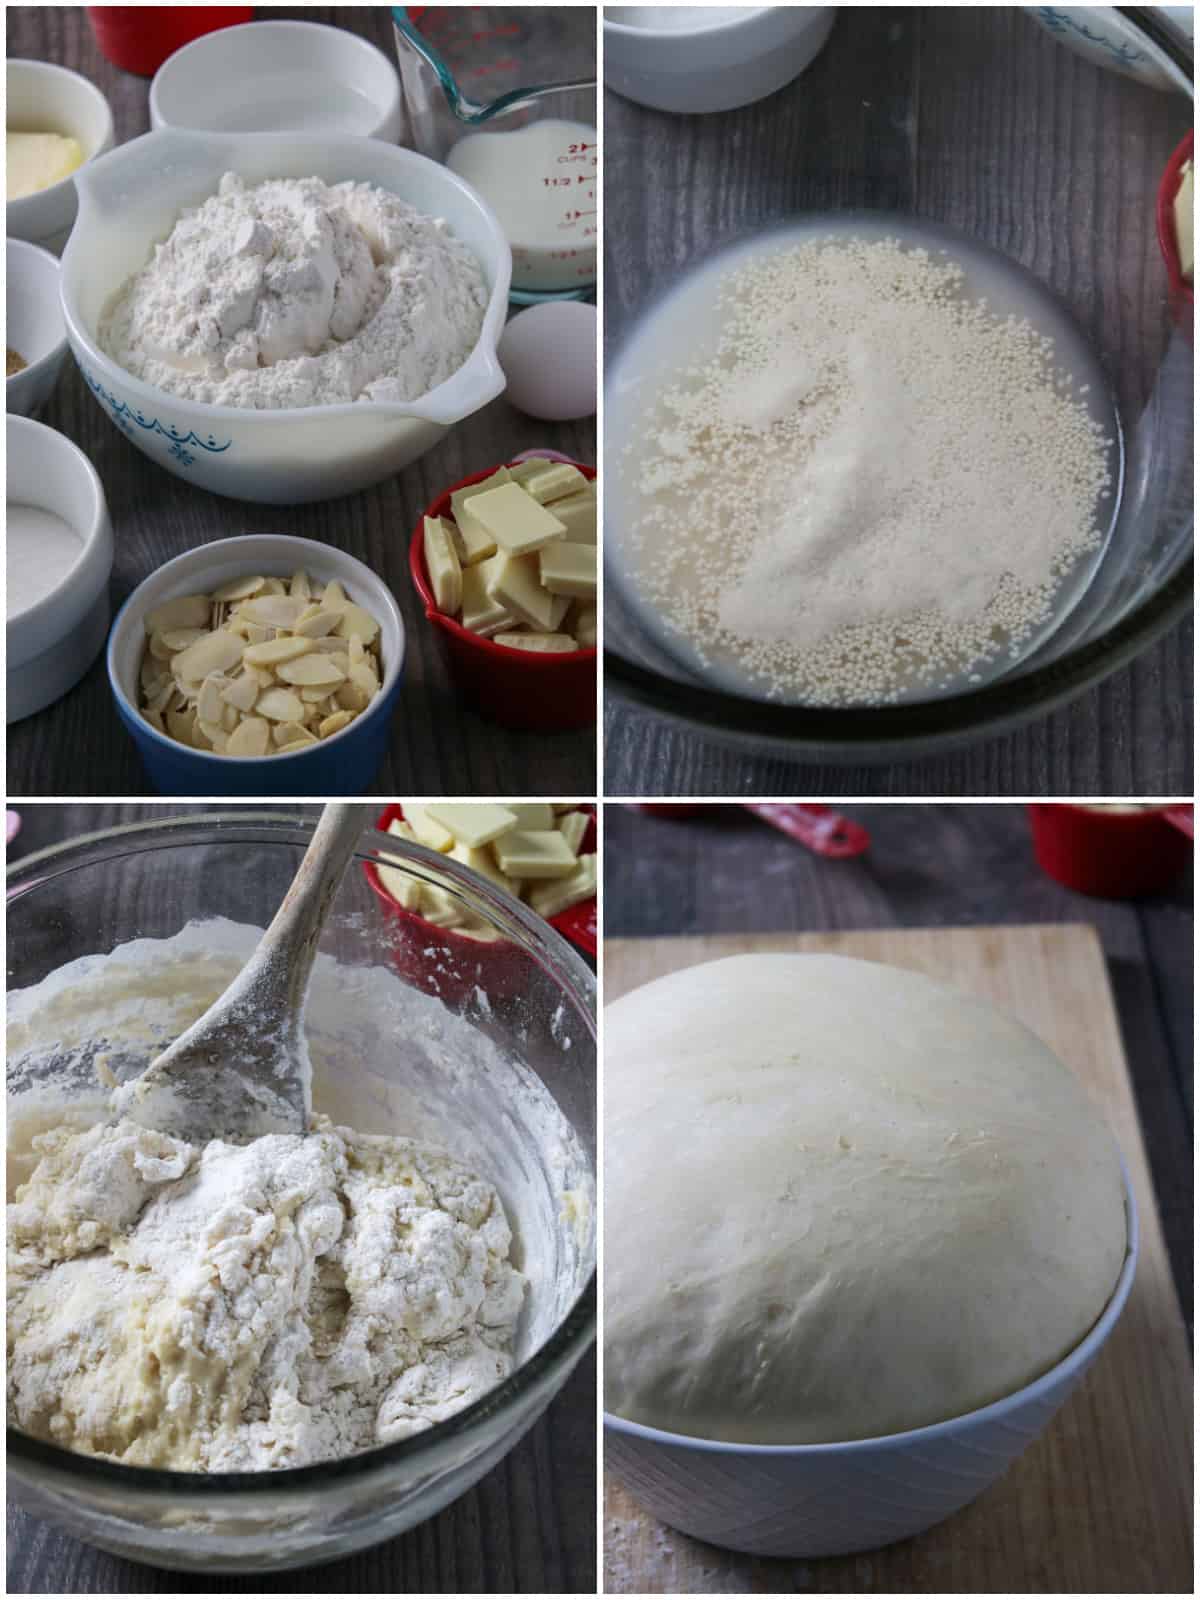 The process of making the yeast donuts dough in a collage.